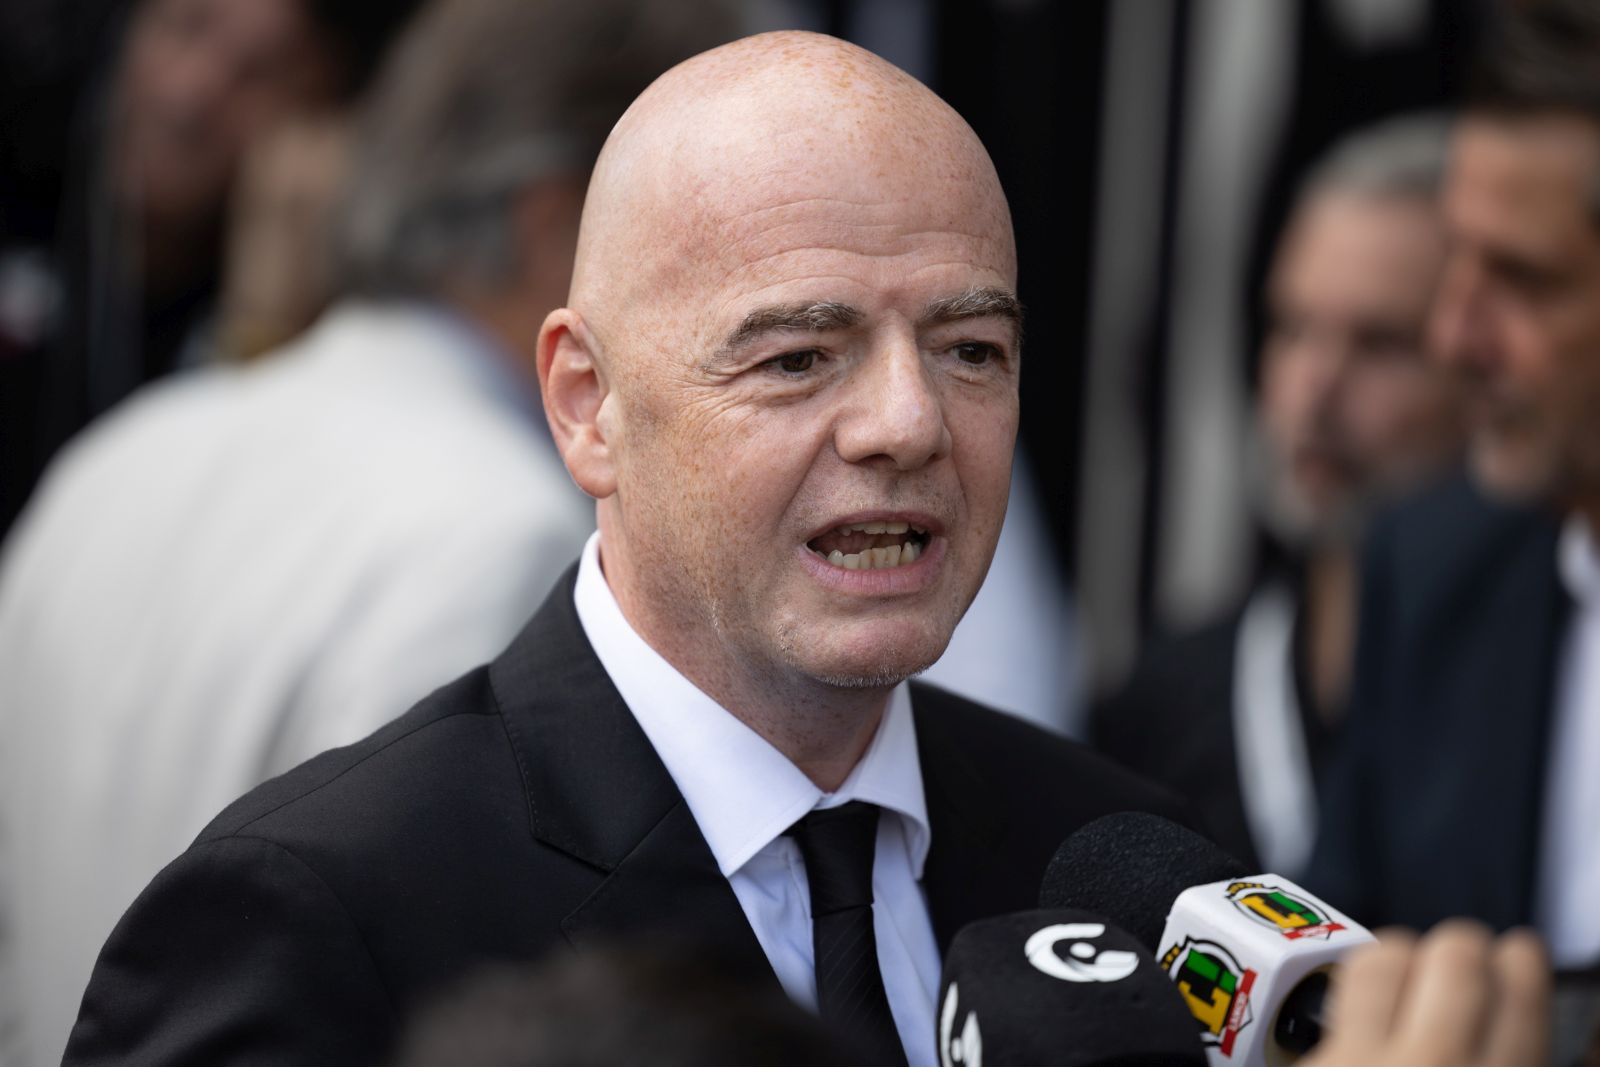 epa10386385 FIFA President Gianni Infantino attends the wake for Edson Arantes do Nascimento 'Pele', at the Vila Belmiro stadium in the city of Santos, Brazil, 02 January 2023. Several Brazilian soccer fans spent the night lining up to attend Pele's wake who died on 29 December 2022 at the age of 82.  EPA/Isaac Fontana